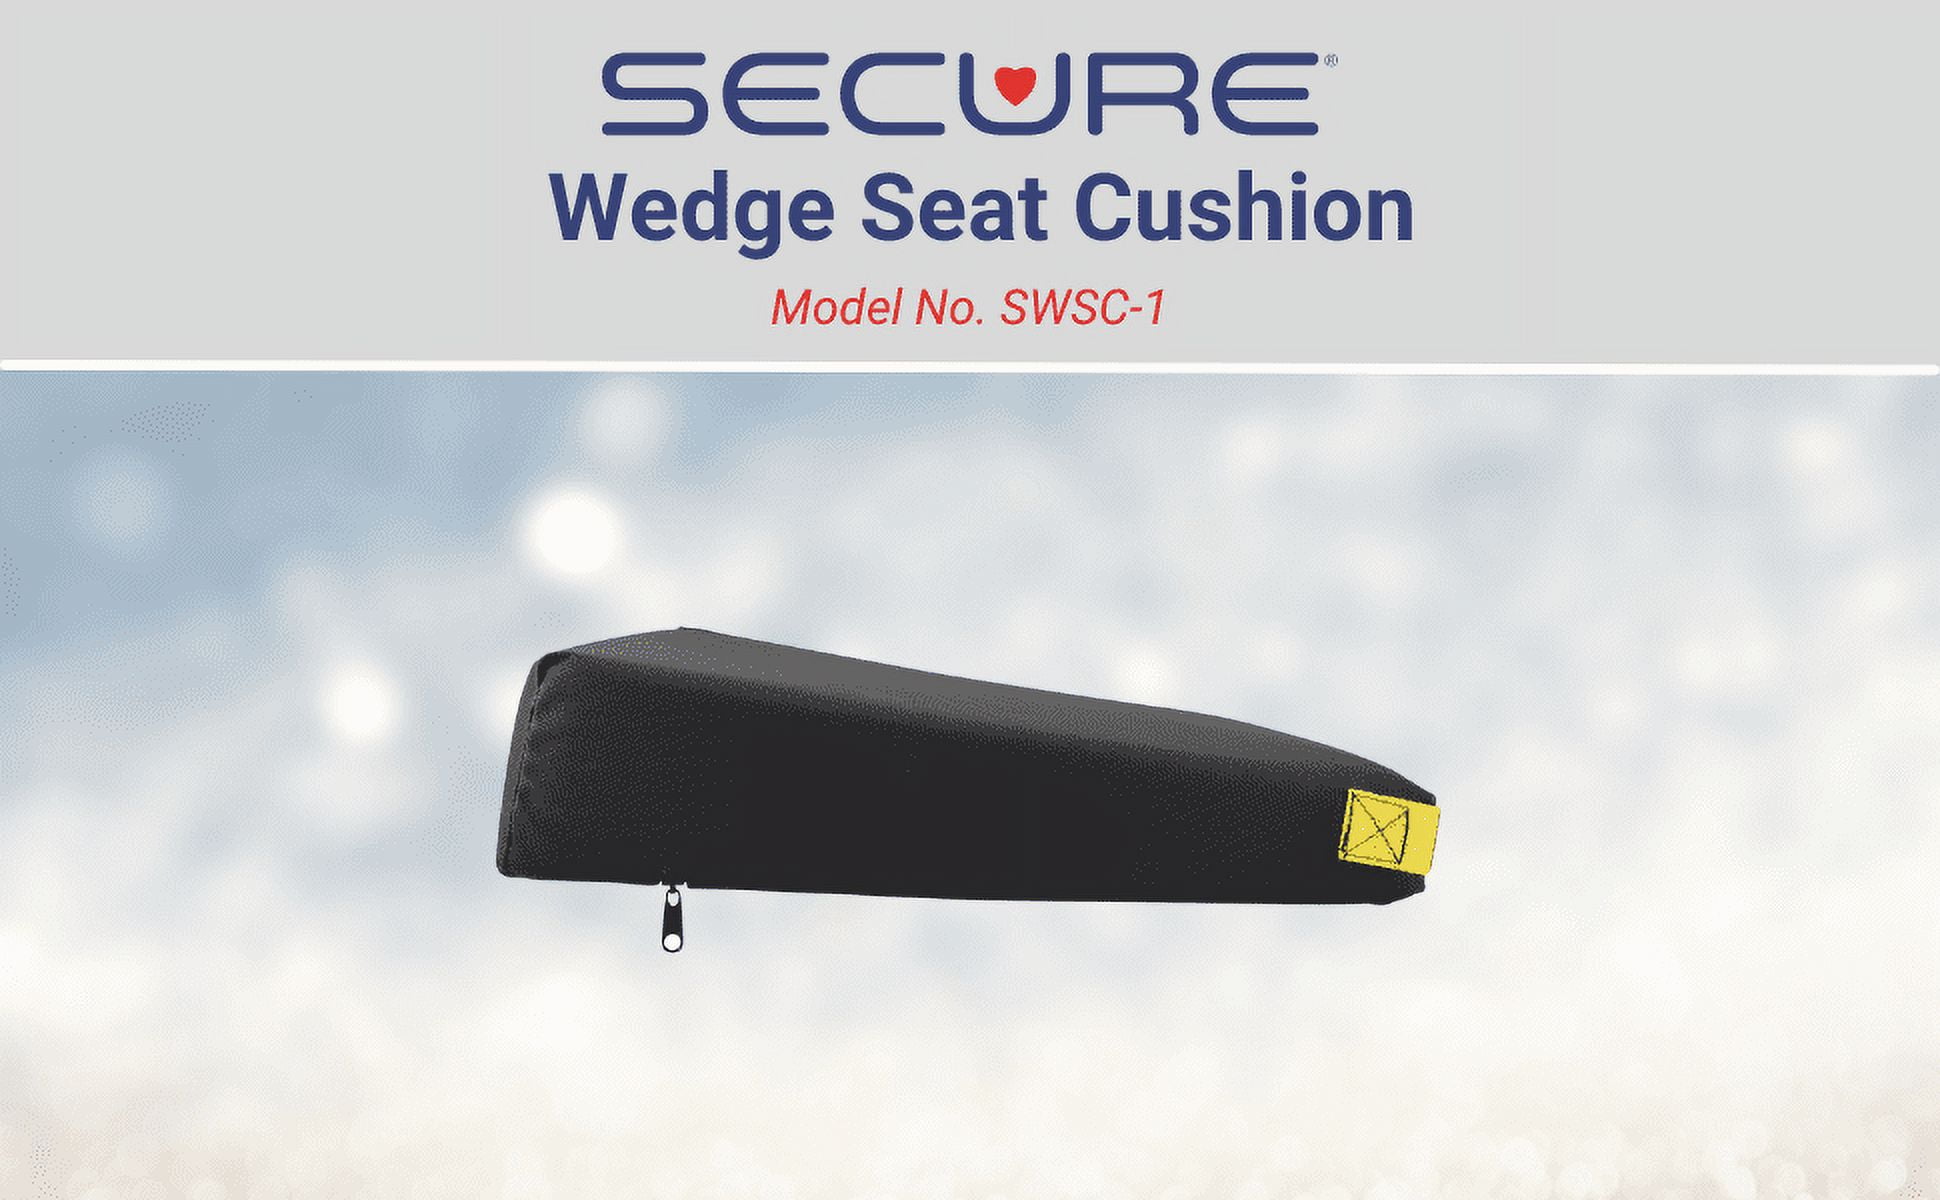 Secure Wheelchair Wedge Pommel Cushion with Safety Straps & Convex Bottom  for Seniors - Prevent Forward Sliding, Positioning, Transfer, Pressure